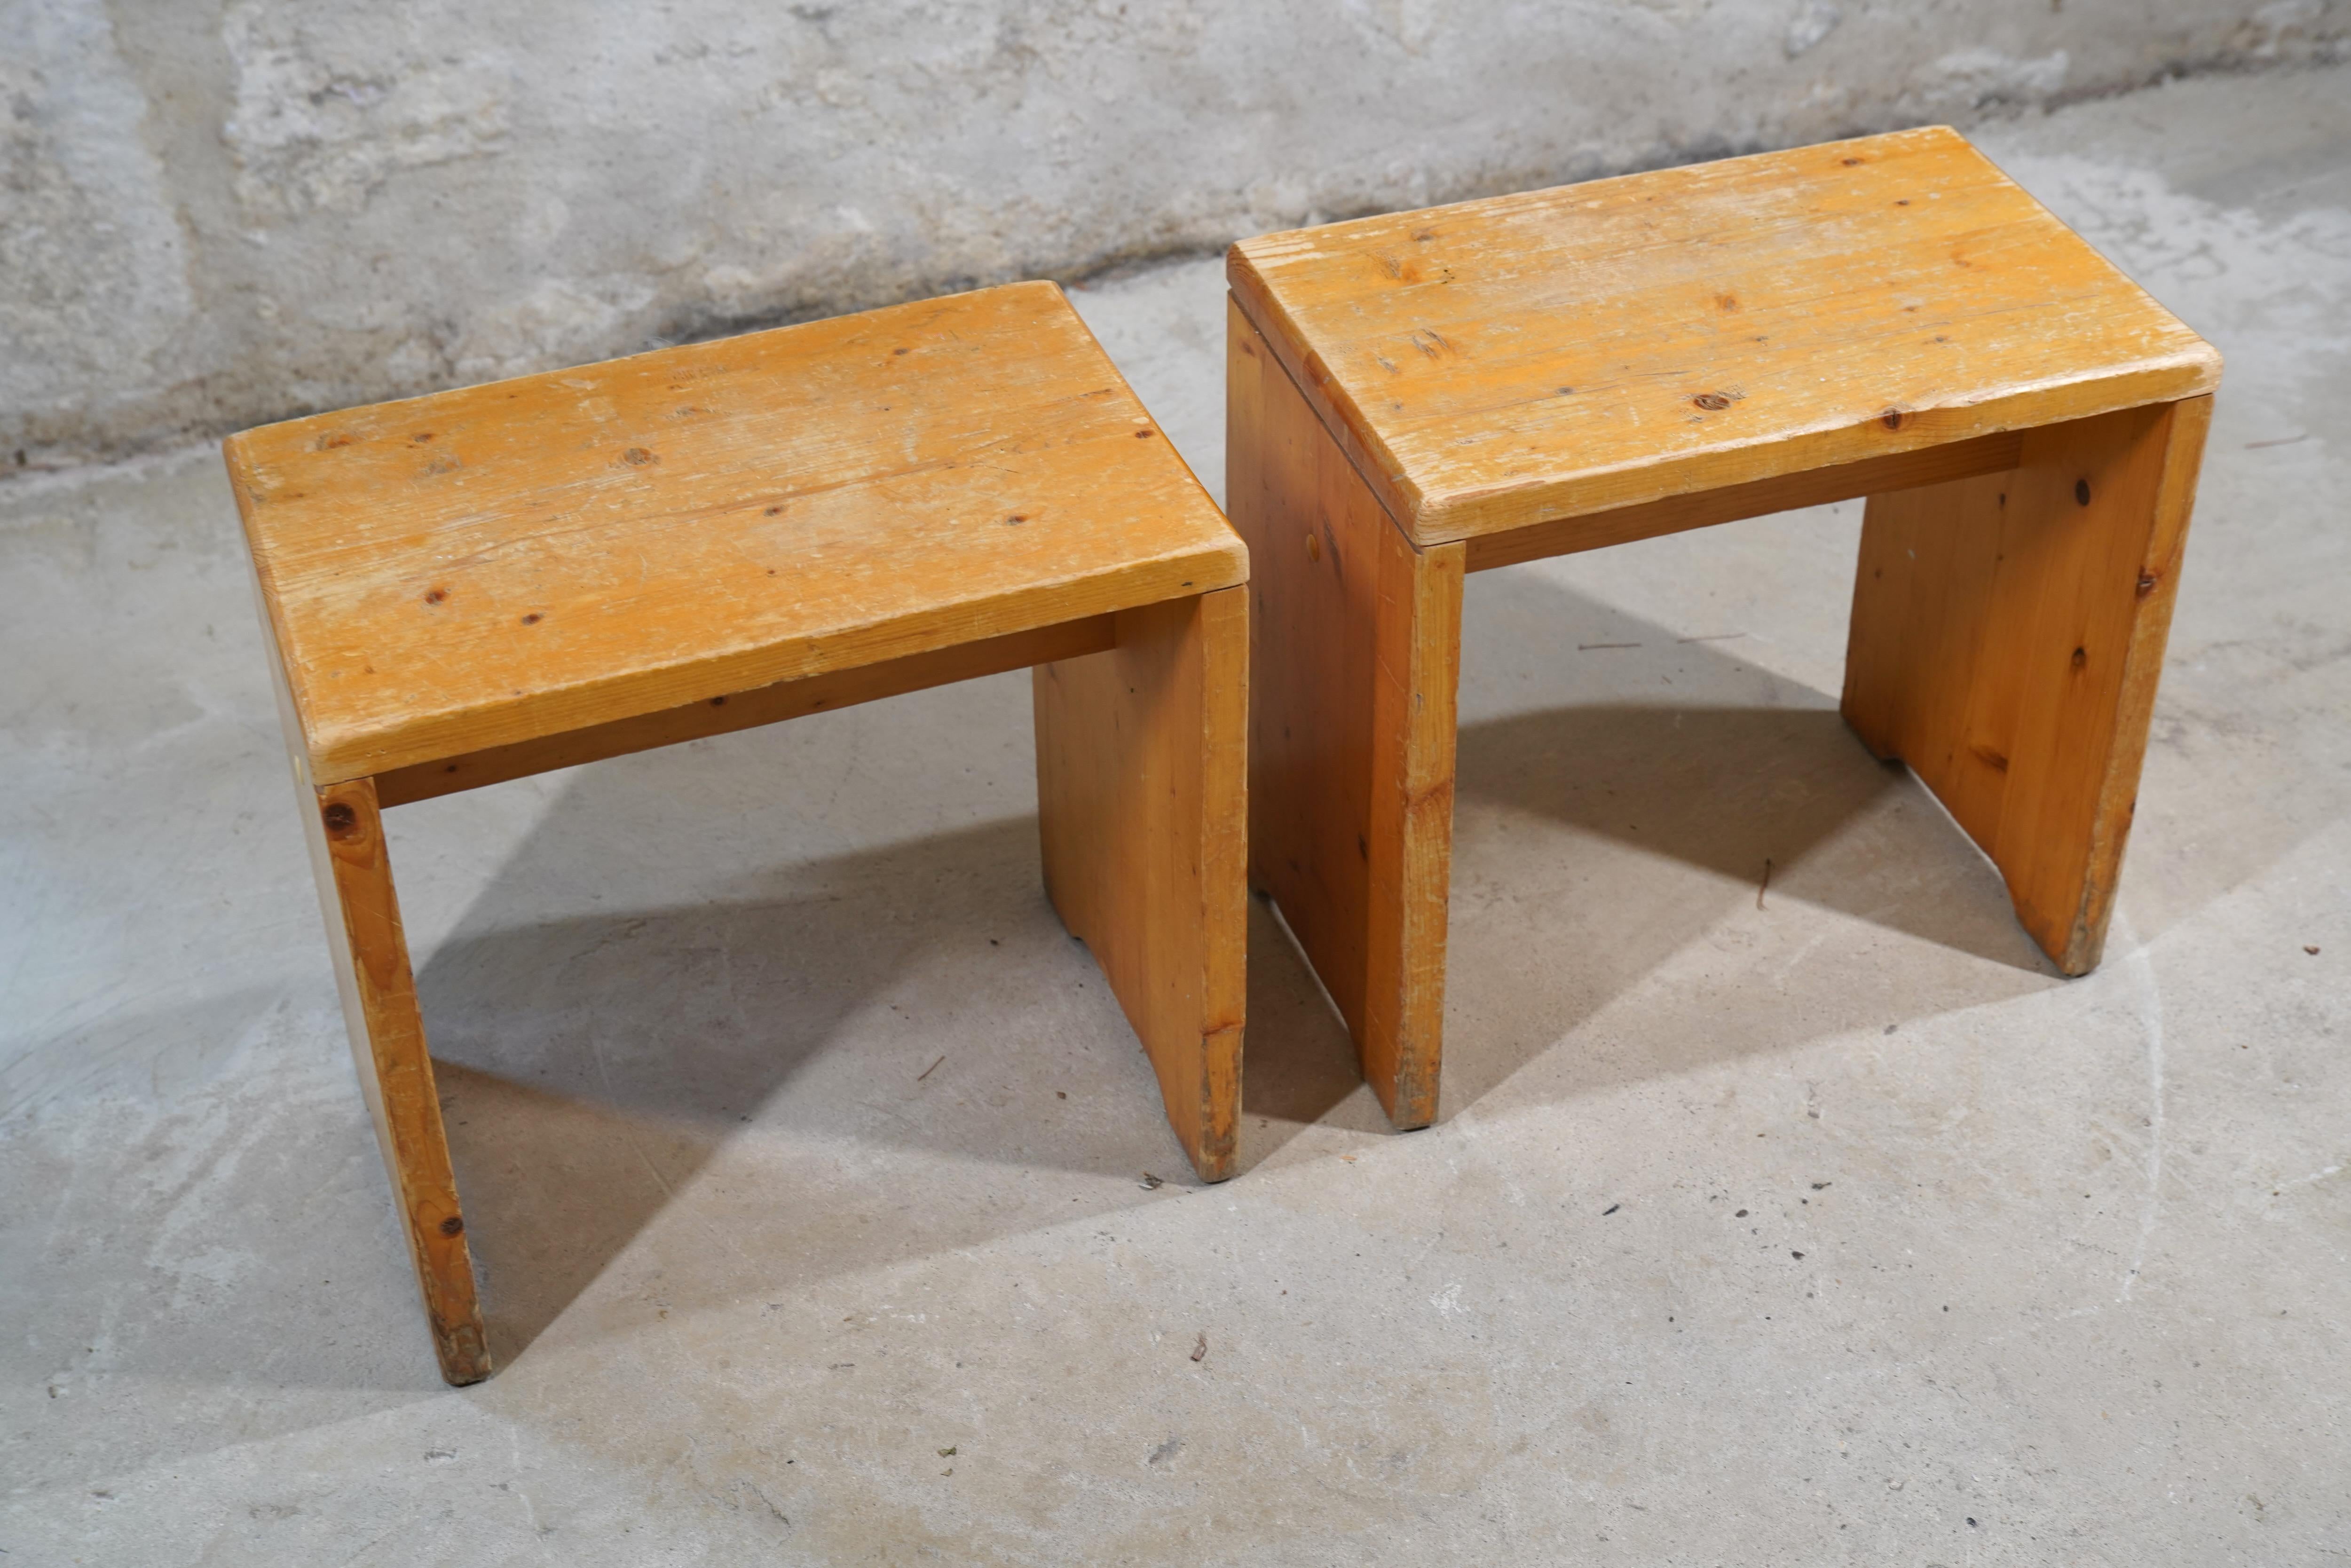 Charlotte Perriand Stools from Les Arcs, France circa 1968 (4 Available) For Sale 1